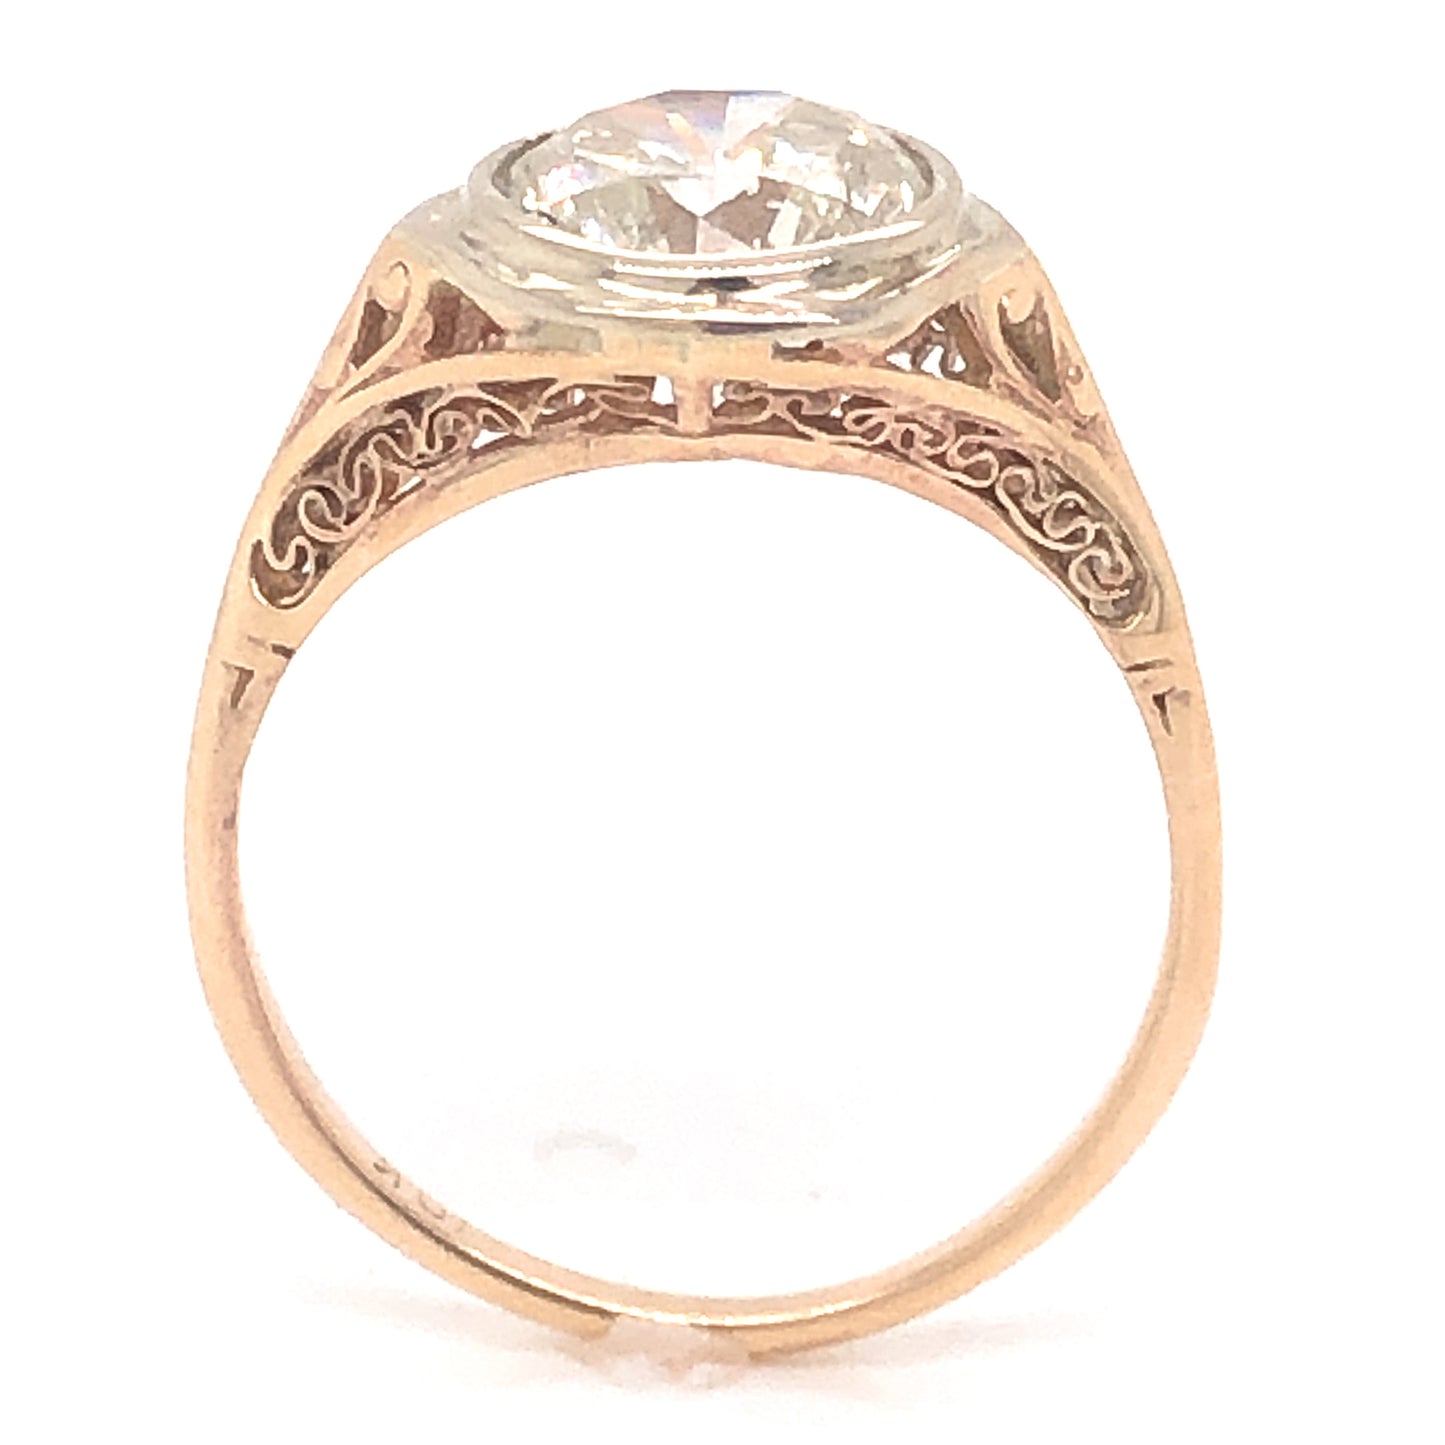 2.15 Vintage Diamond Engagement Ring in 10k Yellow Gold